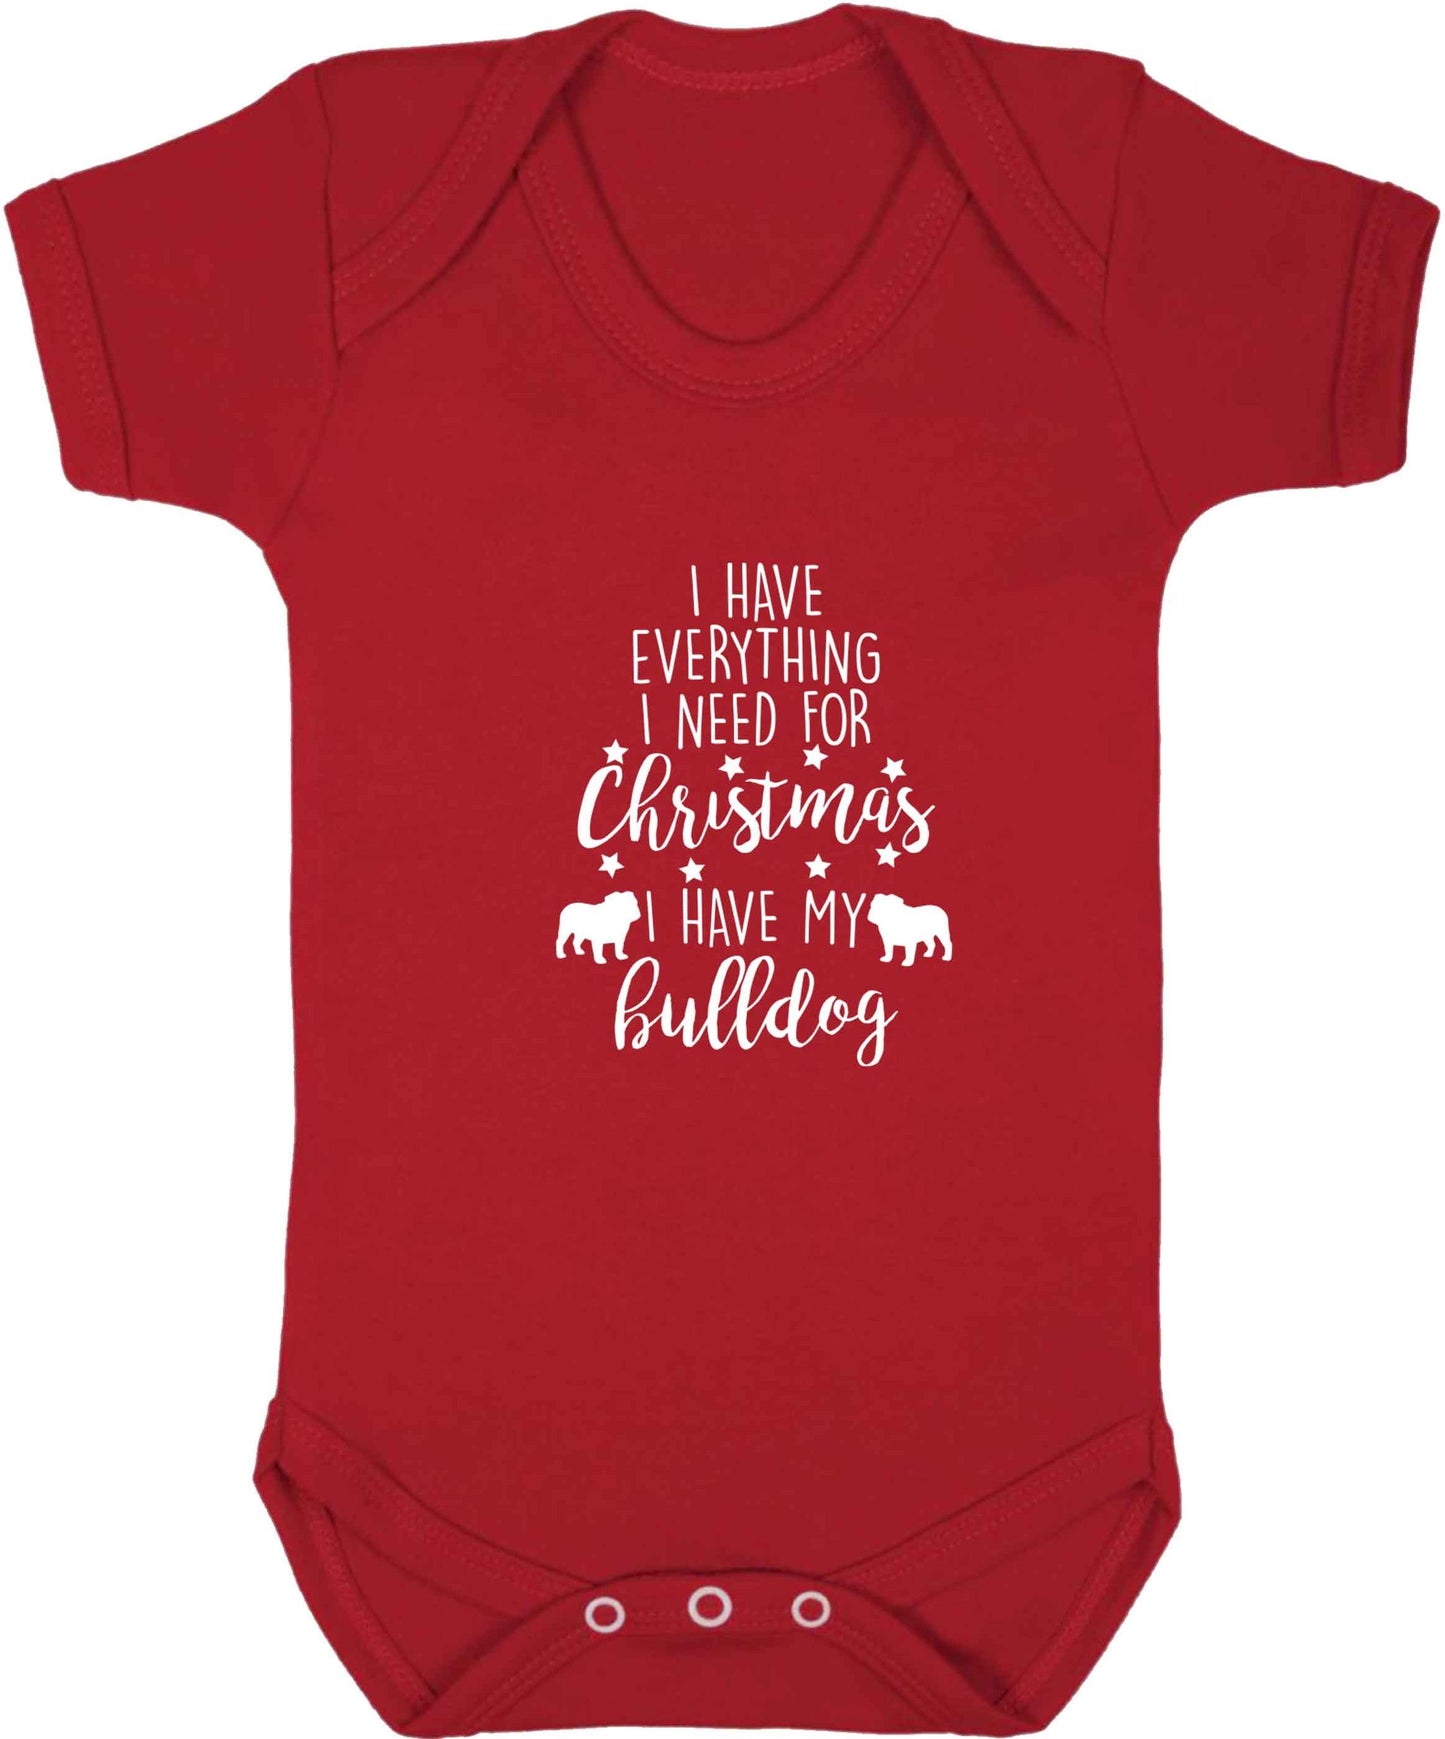 I have everything I need for Christmas I have my bulldog baby vest red 18-24 months